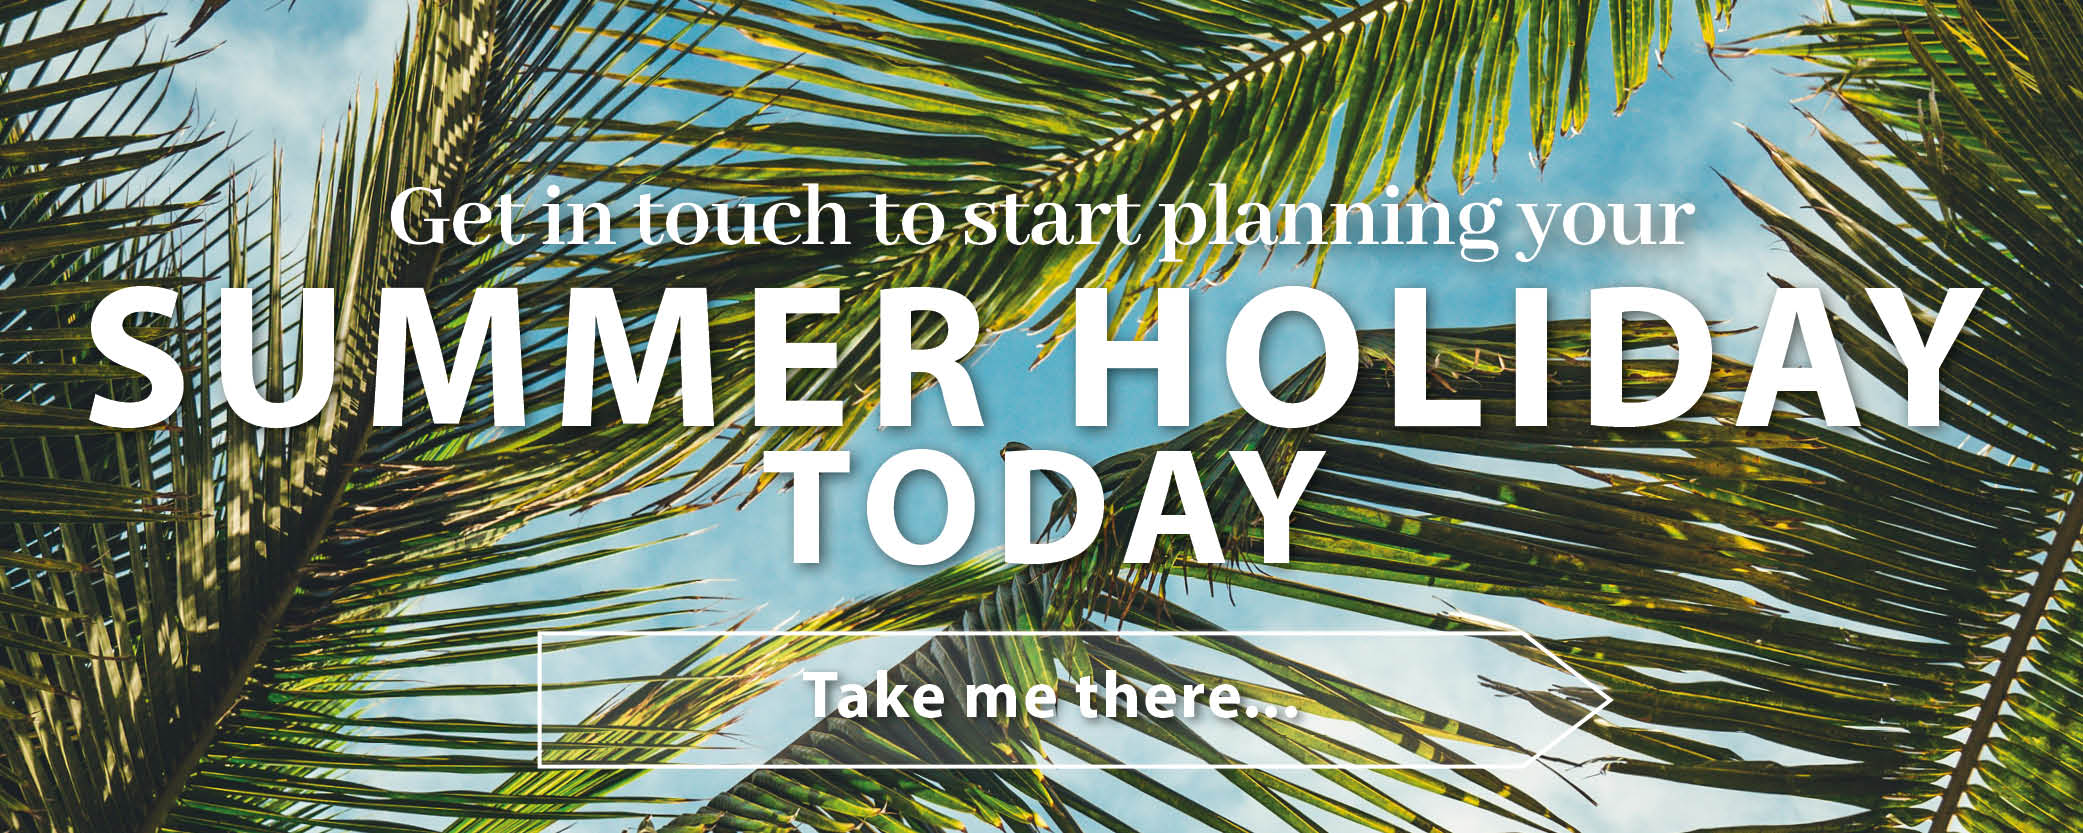 Get a quote for your Summer holiday